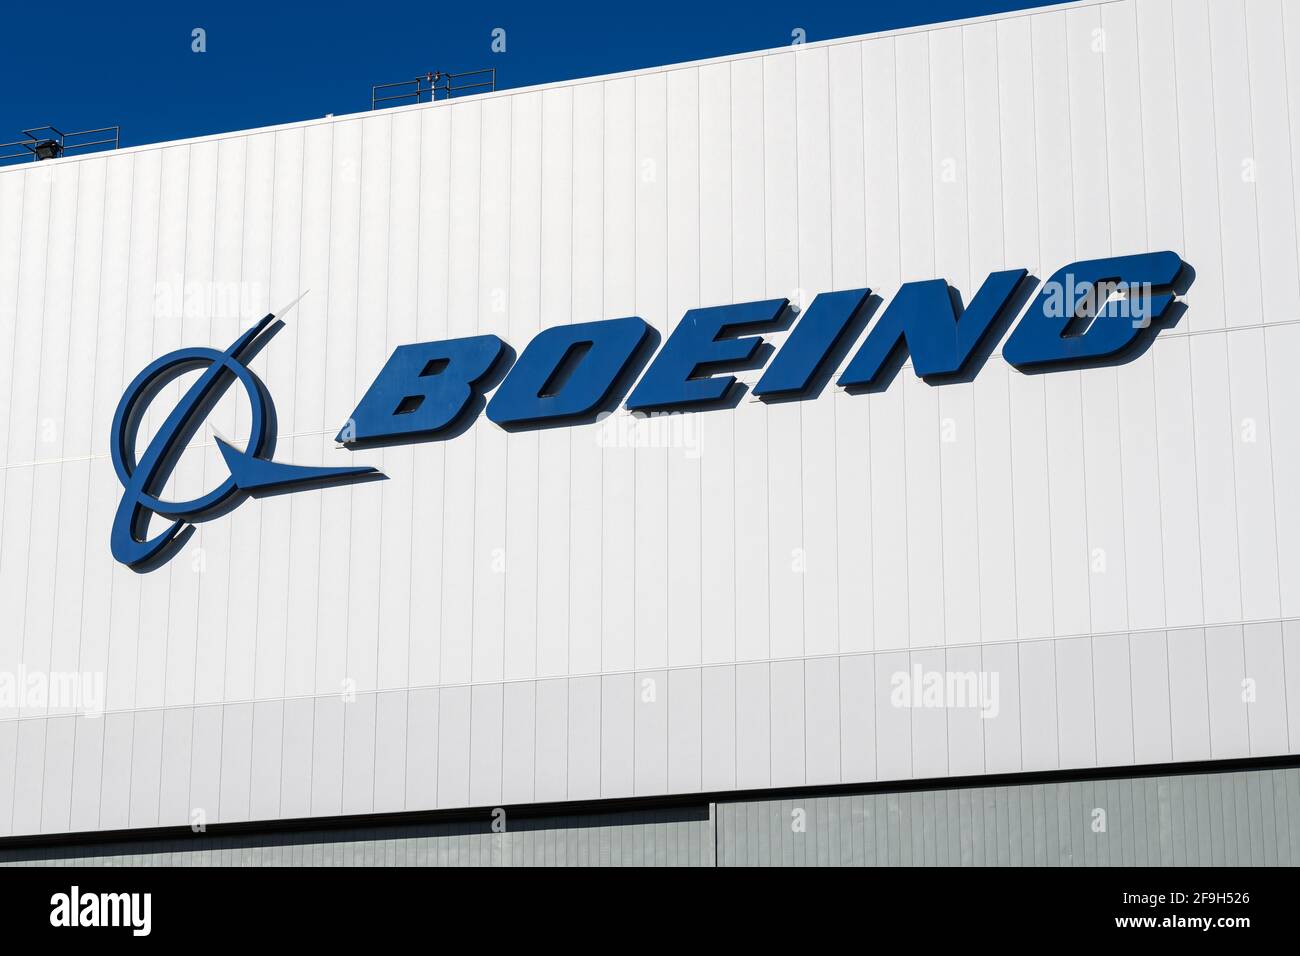 Seattle - April 18, 2021; Boeing Corporation logo on a white building with blue sky in Seattle.  Boeing is a leading aerospace and defence manufacturi Stock Photo